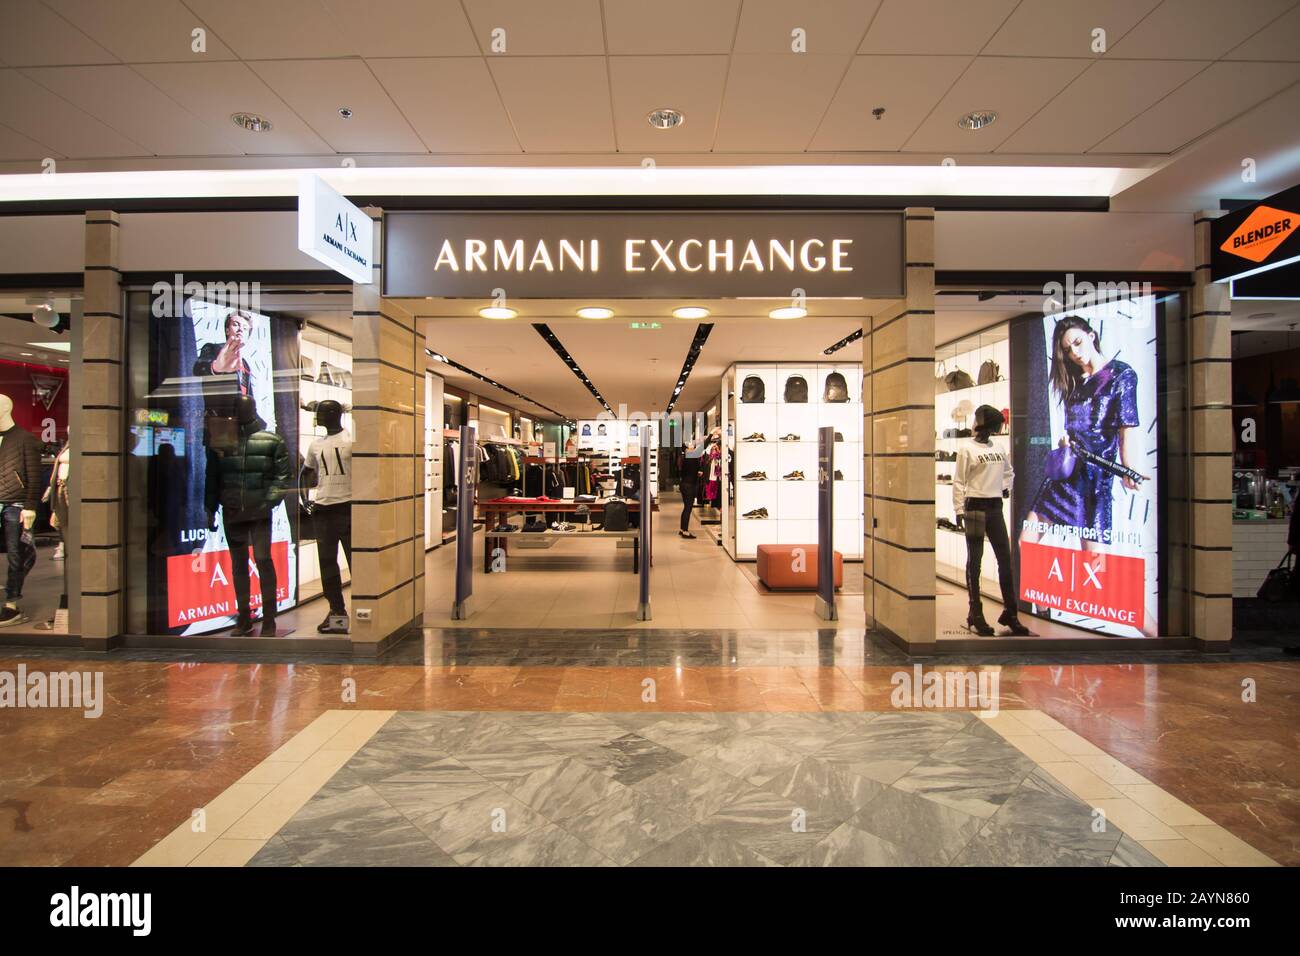 armani exchange outlet store